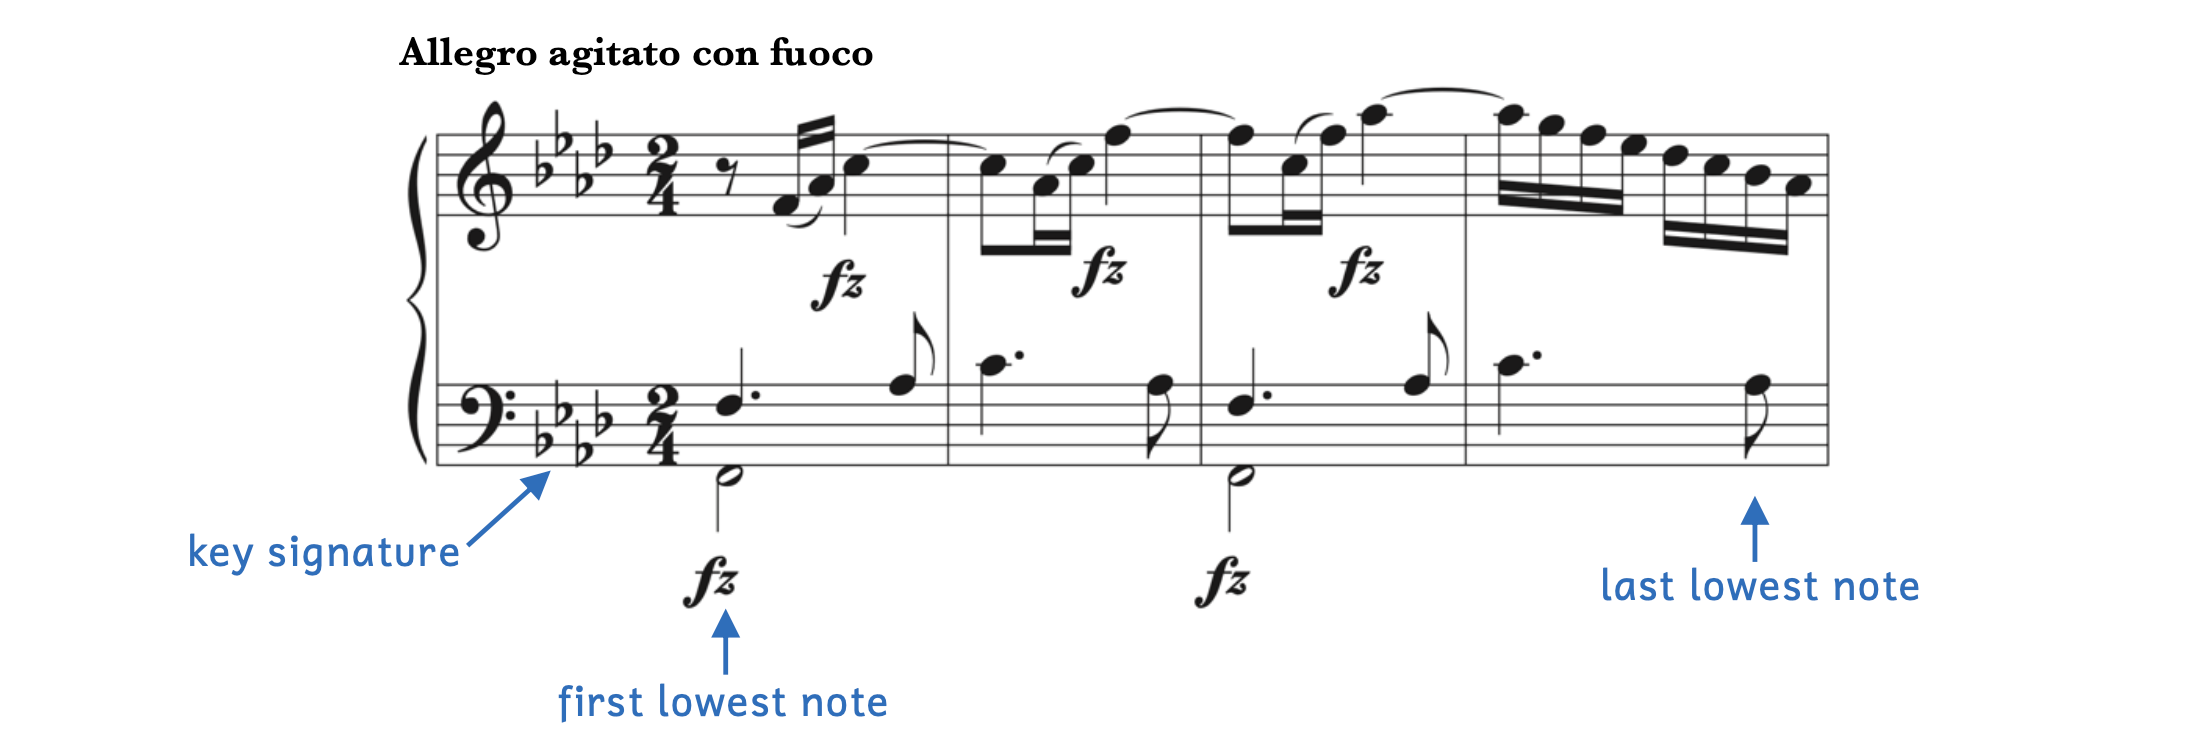 Finding the key from Montgeroult's Piano Sonata, Op. 5, No. 2, third movement - Allegro agitato con fuoco: Step one, identify the key signature options. Step 2, identify the first lowest note. And step 3, identify the last lowest note